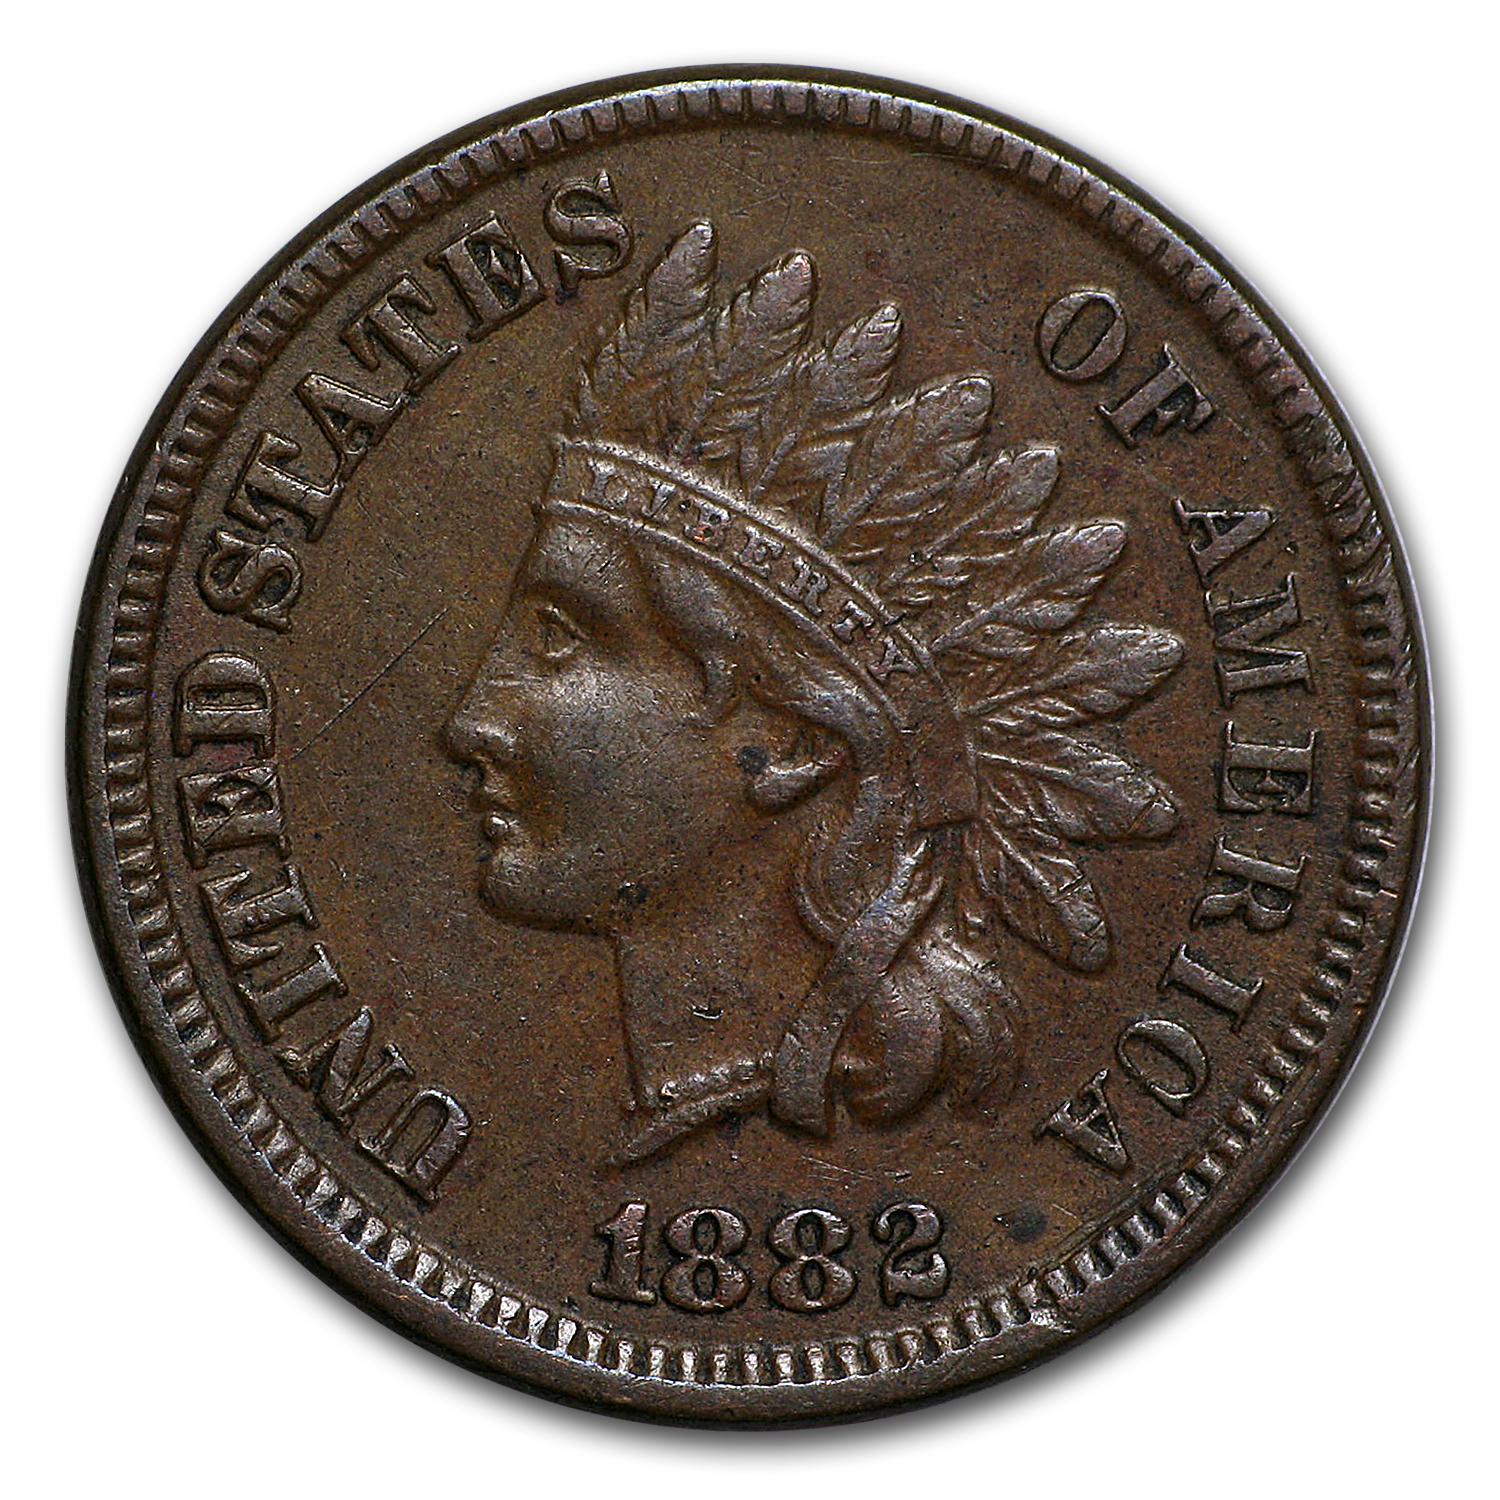 Buy 1882 Indian Head Cent XF